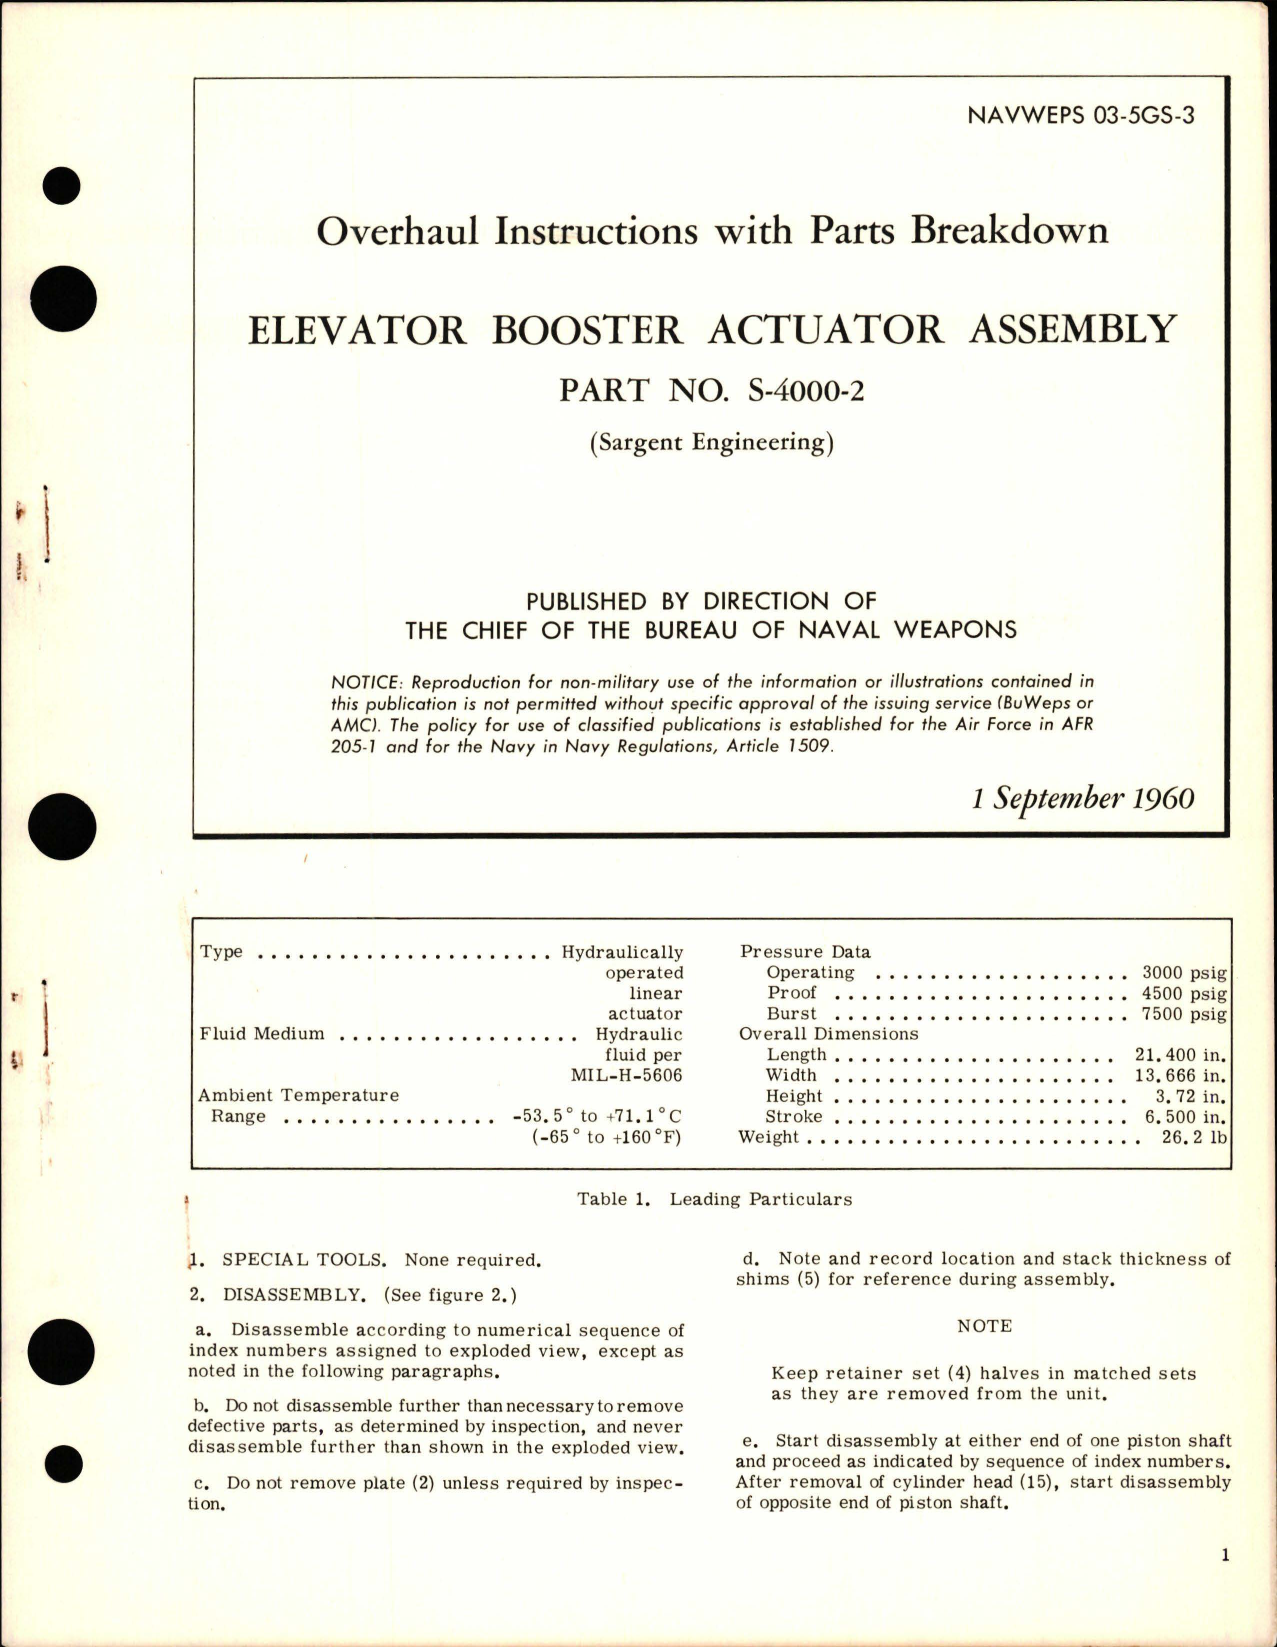 Sample page 1 from AirCorps Library document: Overhaul Instructions with Parts Breakdown for Elevator Booster Actuator Assembly - Part S-4000-2